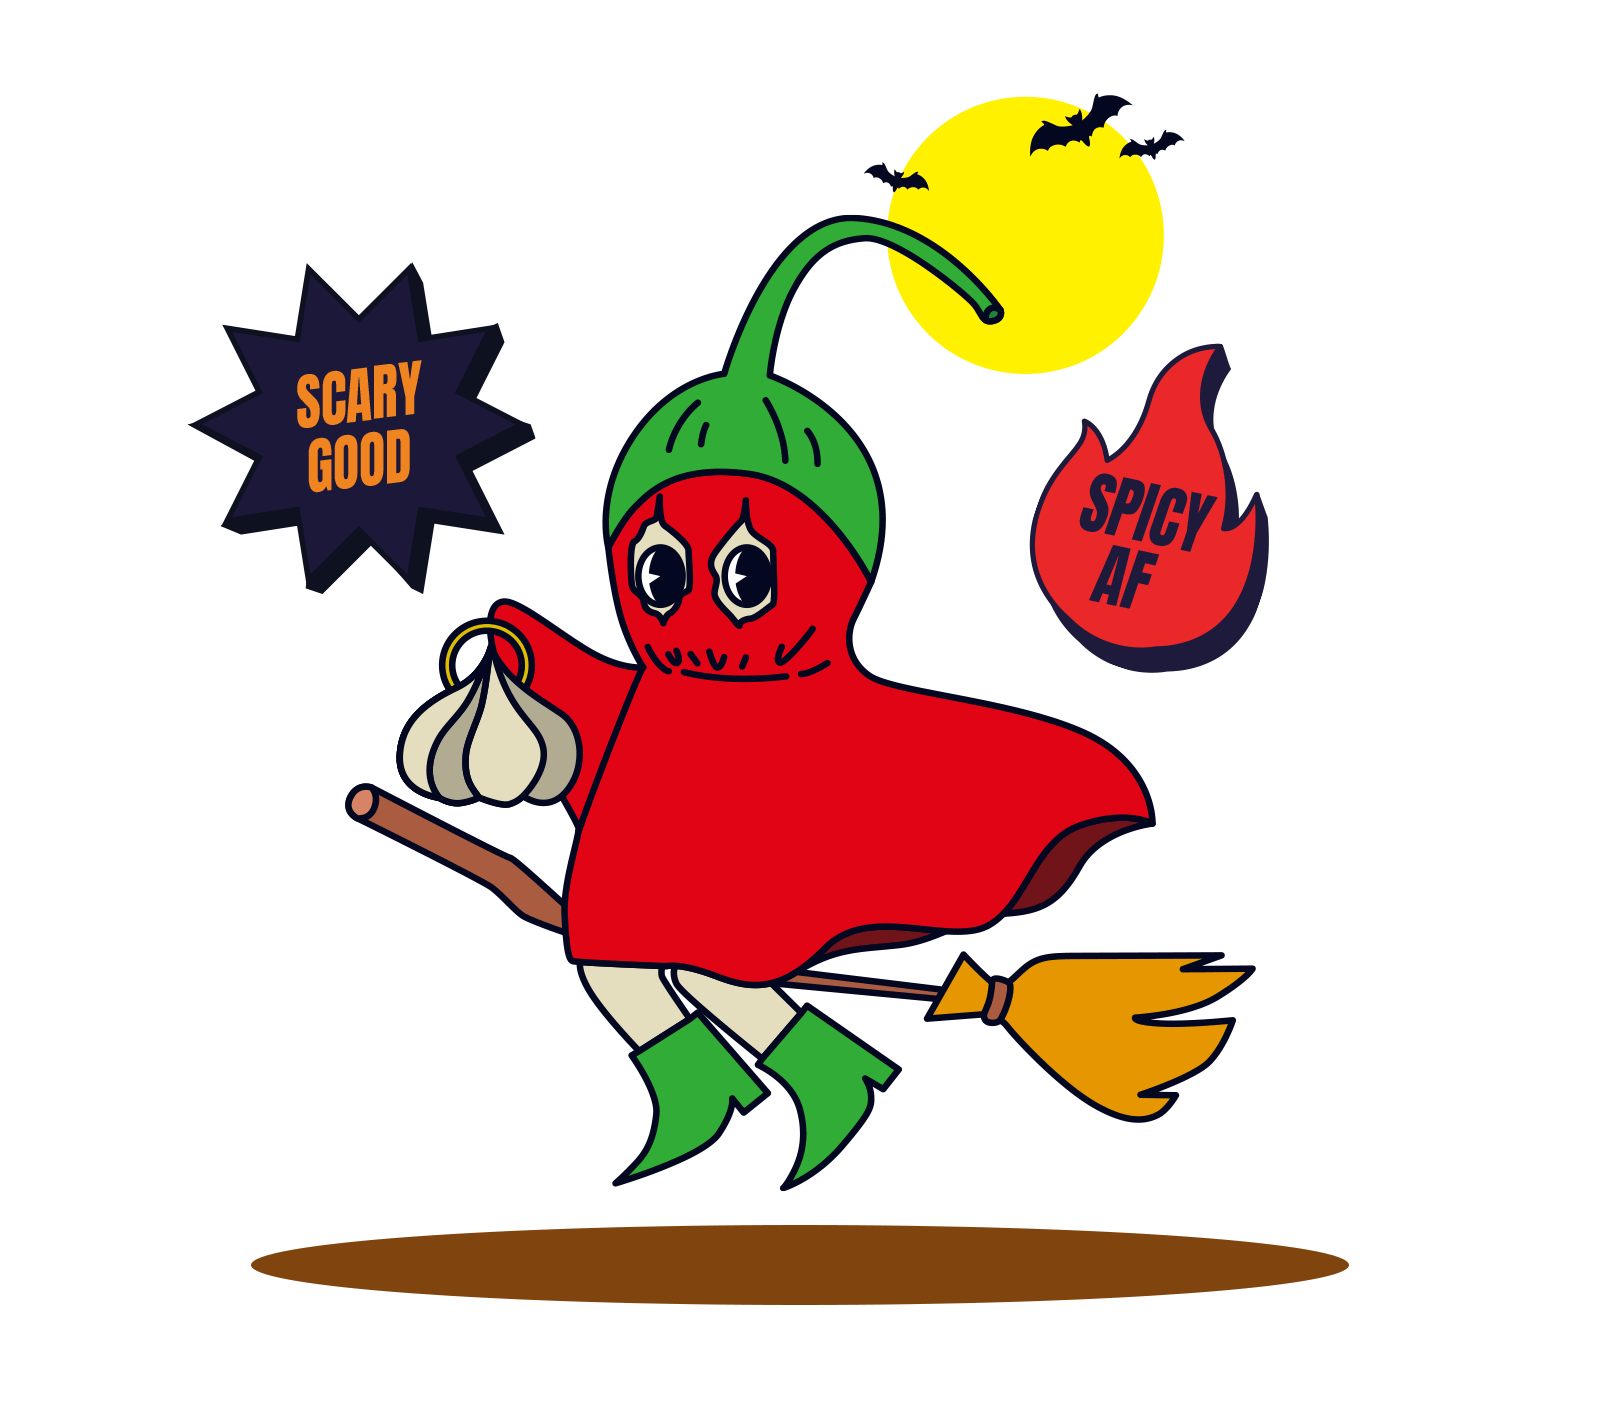 Illustration of Ghost Pepper Character riding broom with "Scary Good" and "Spicy AF" callouts.